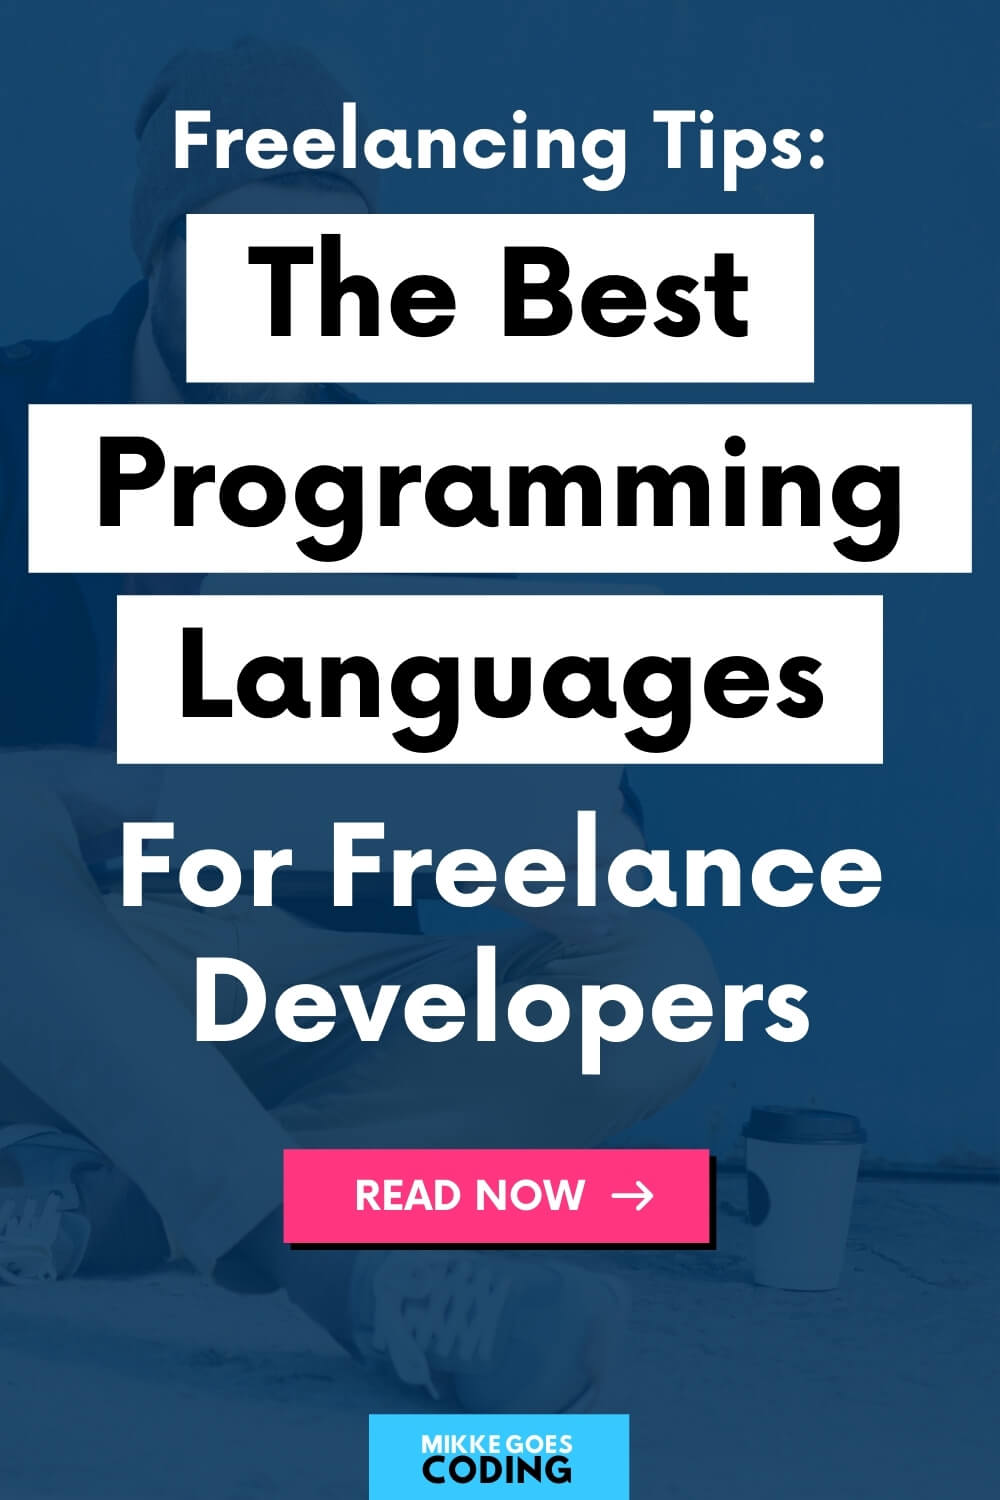 What Is The Best Programming Language for Freelance Developers?